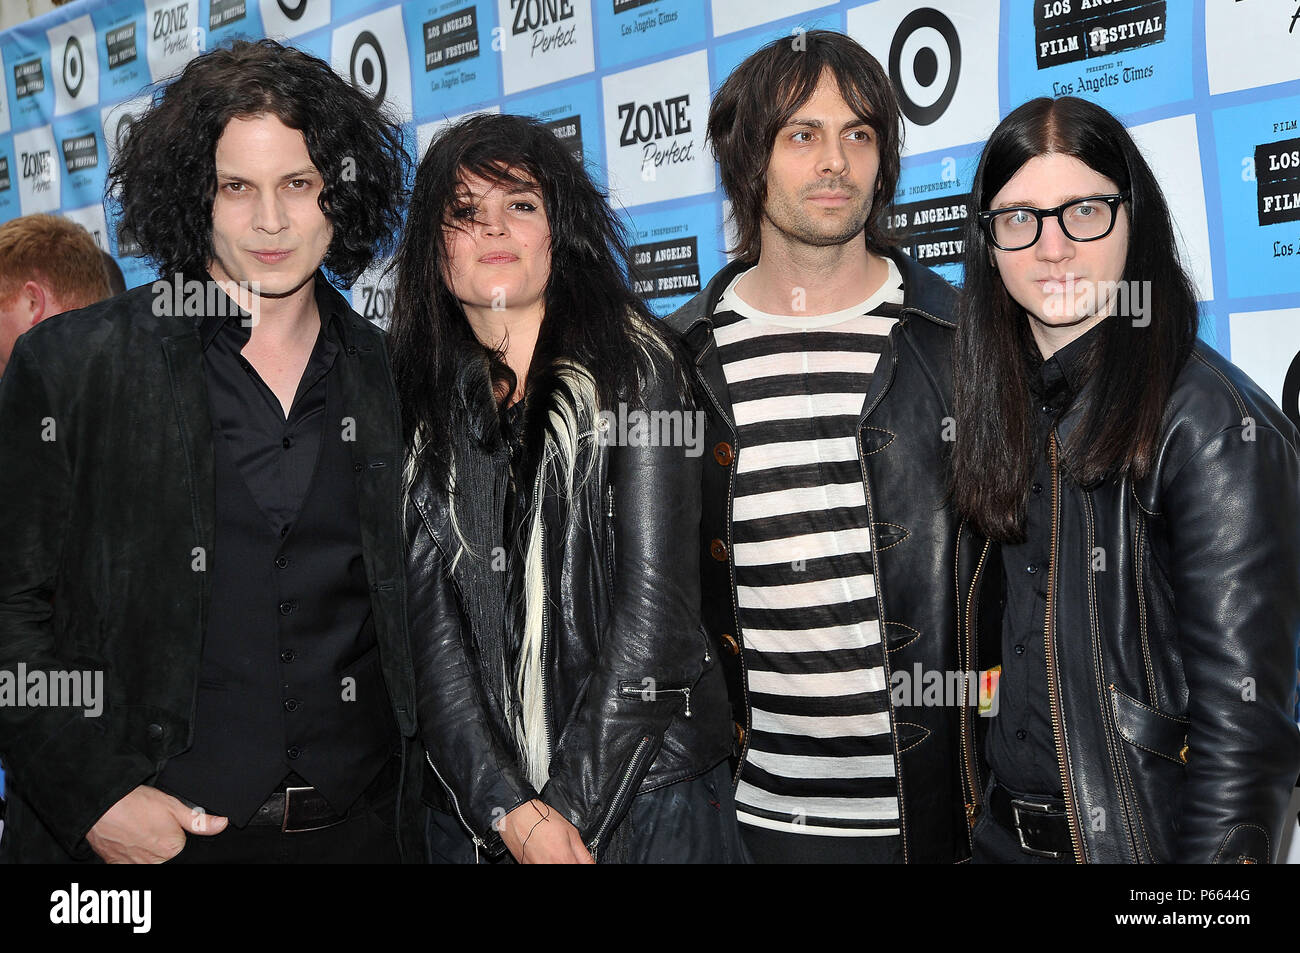 Jack White, Alison Mosshart ( of The Kills ), Dean Fertita ( of the Queens of Stone Age ), Jack lawrence ( of the Raconteurs )- It May Get loud Premiere at the LA Film Festival at the Man Festival Theatre In Los Angeles.          -            TheDeadWeather 25.jpgTheDeadWeather 25  Event in Hollywood Life - California, Red Carpet Event, USA, Film Industry, Celebrities, Photography, Bestof, Arts Culture and Entertainment, Topix Celebrities fashion, Best of, Hollywood Life, Event in Hollywood Life - California, Red Carpet and backstage, ,Arts Culture and Entertainment, Photography,    inquiry ts Stock Photo